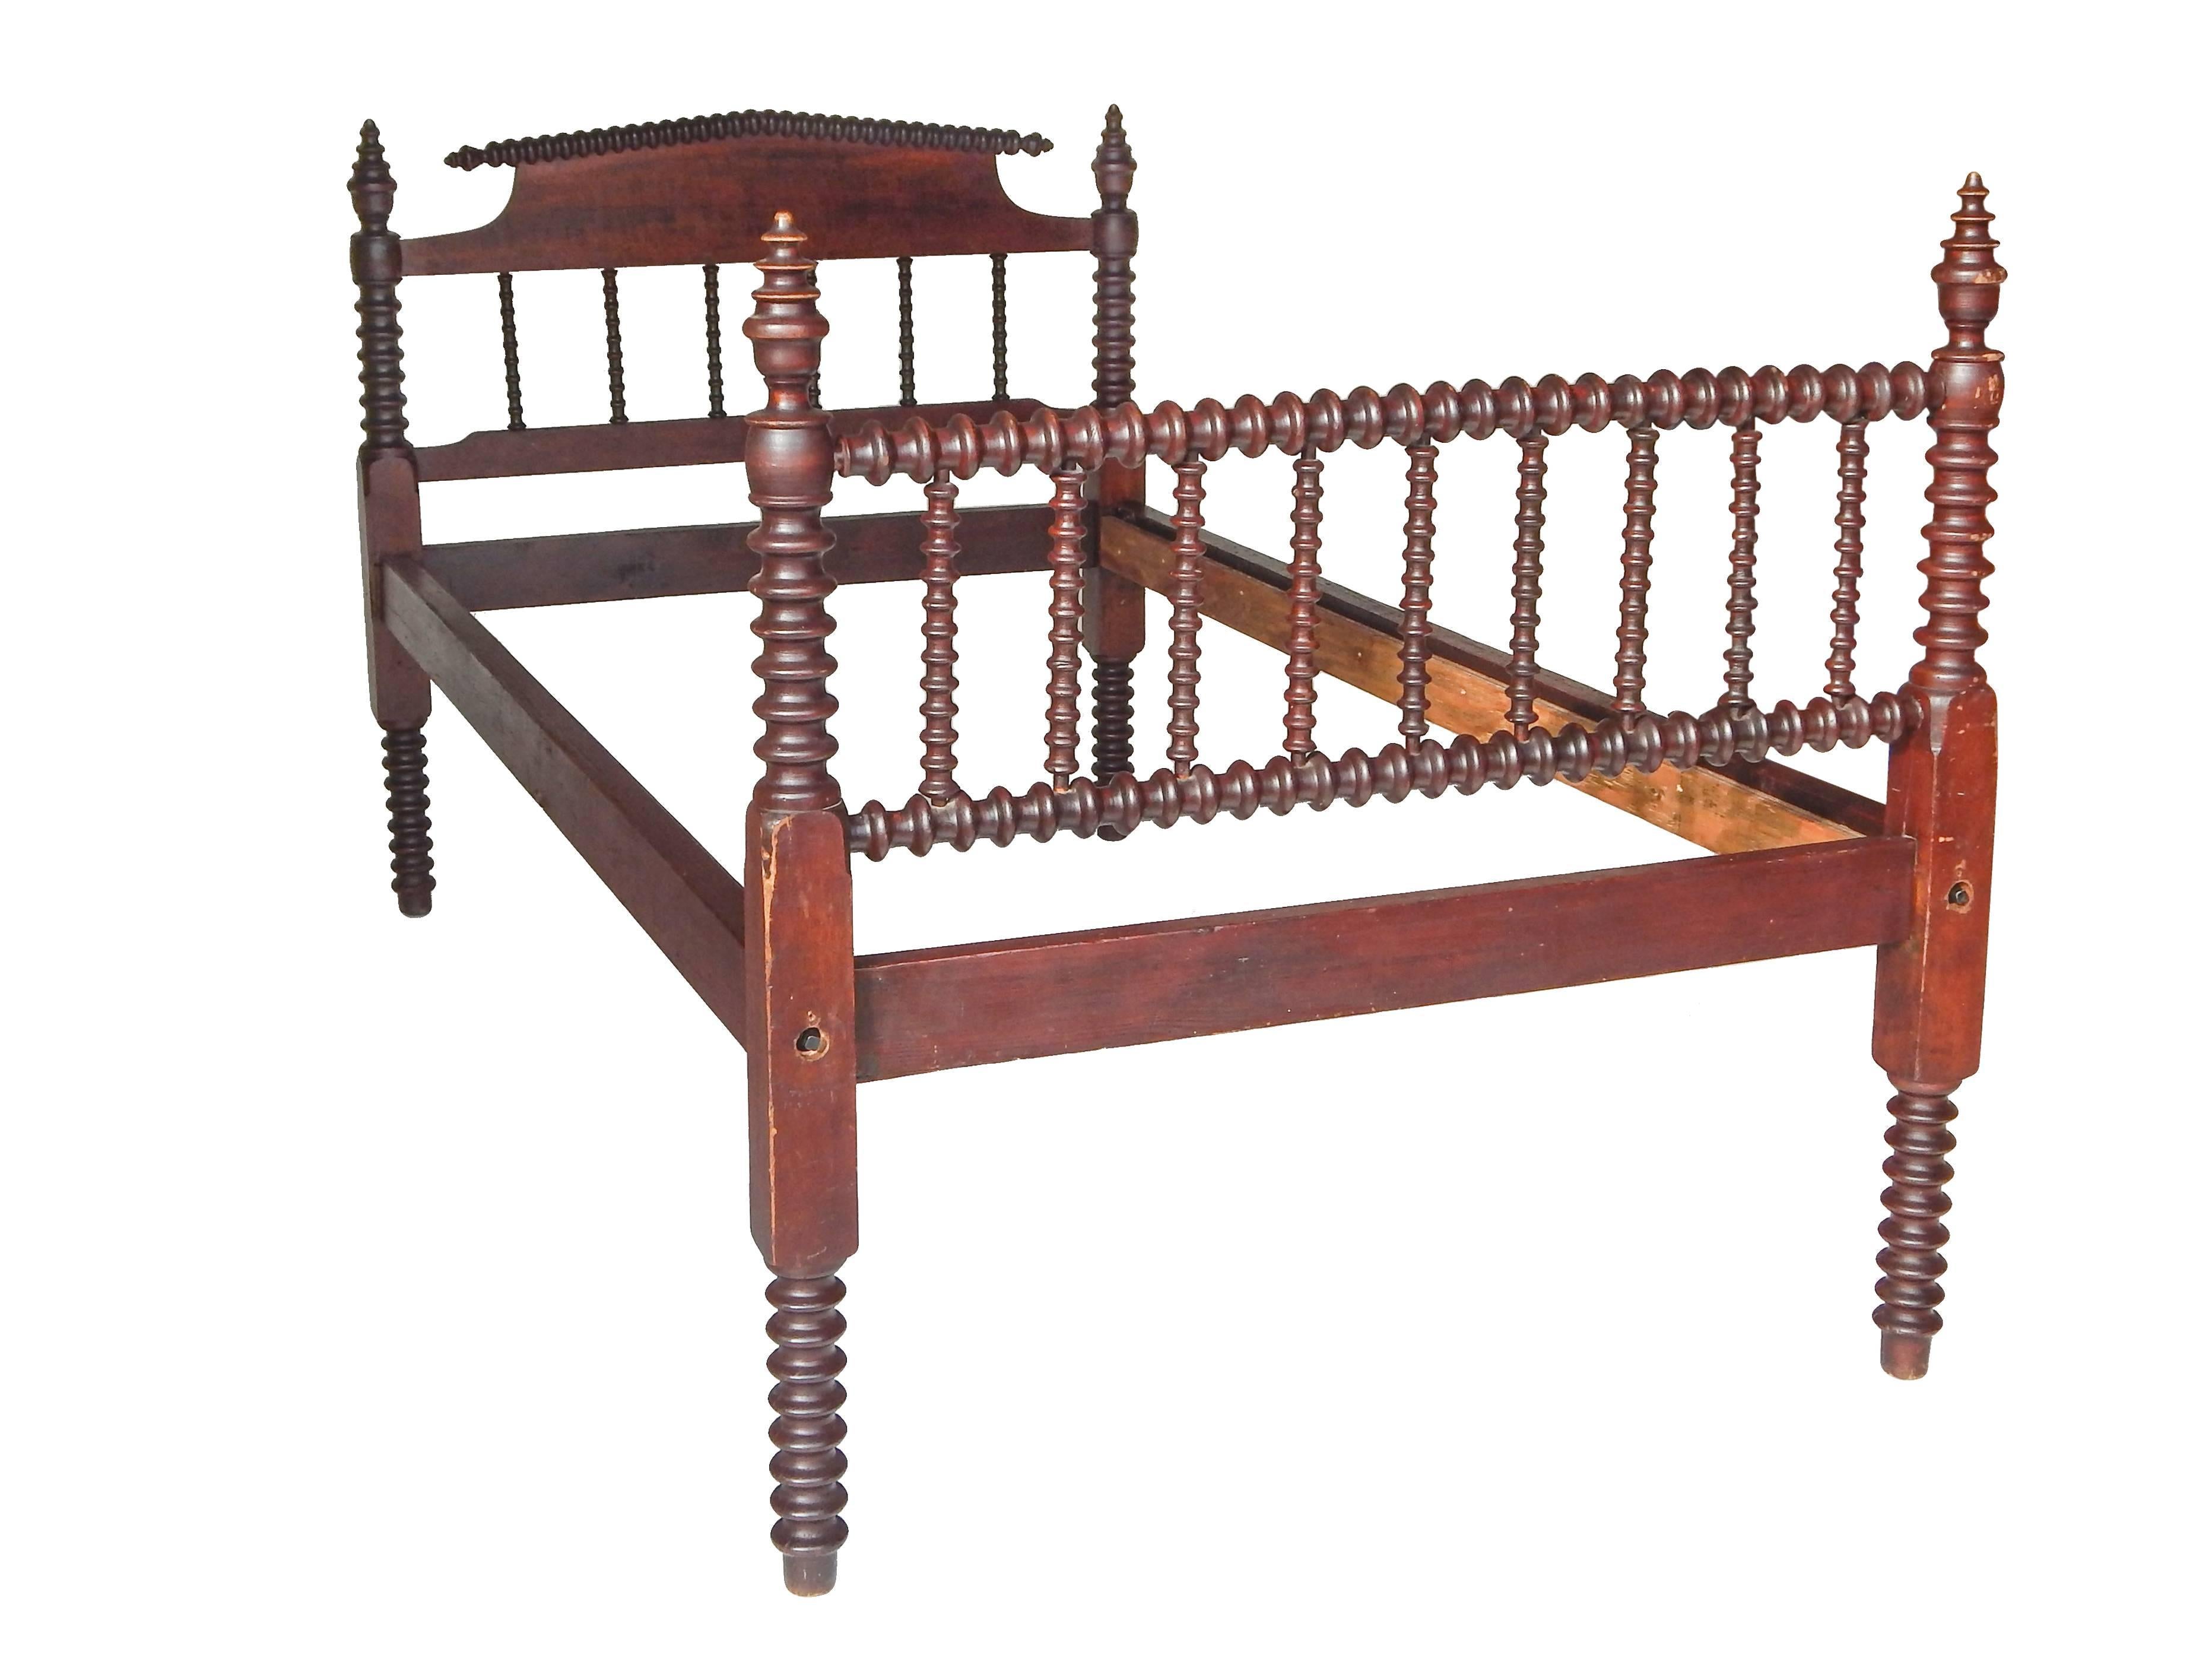 Stunning near pair of spindle beds-
Second bed slightly larger
Measures: 45” H x 81” W x 44 1/2” D -
(interior: 44” x 75”).